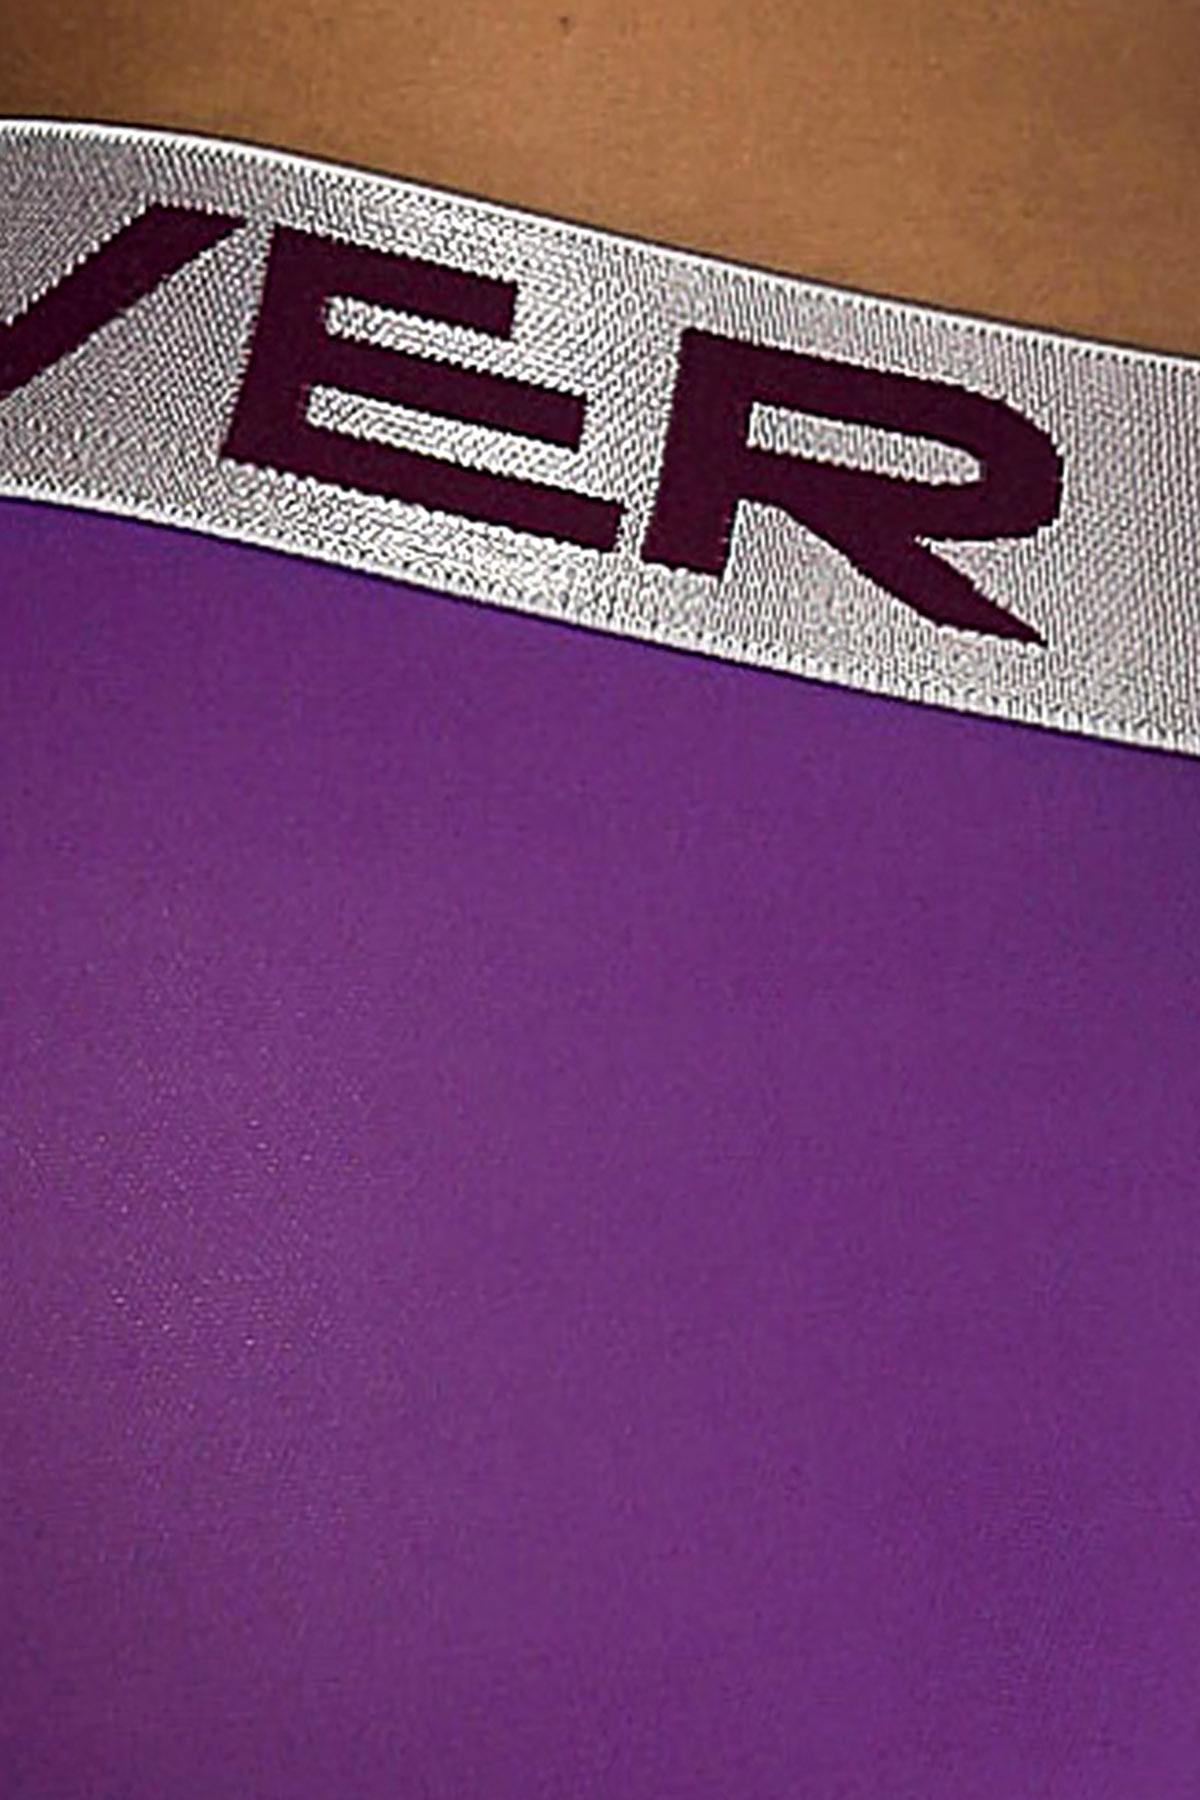 Clever Grape Limited Edition Mesh Trunk